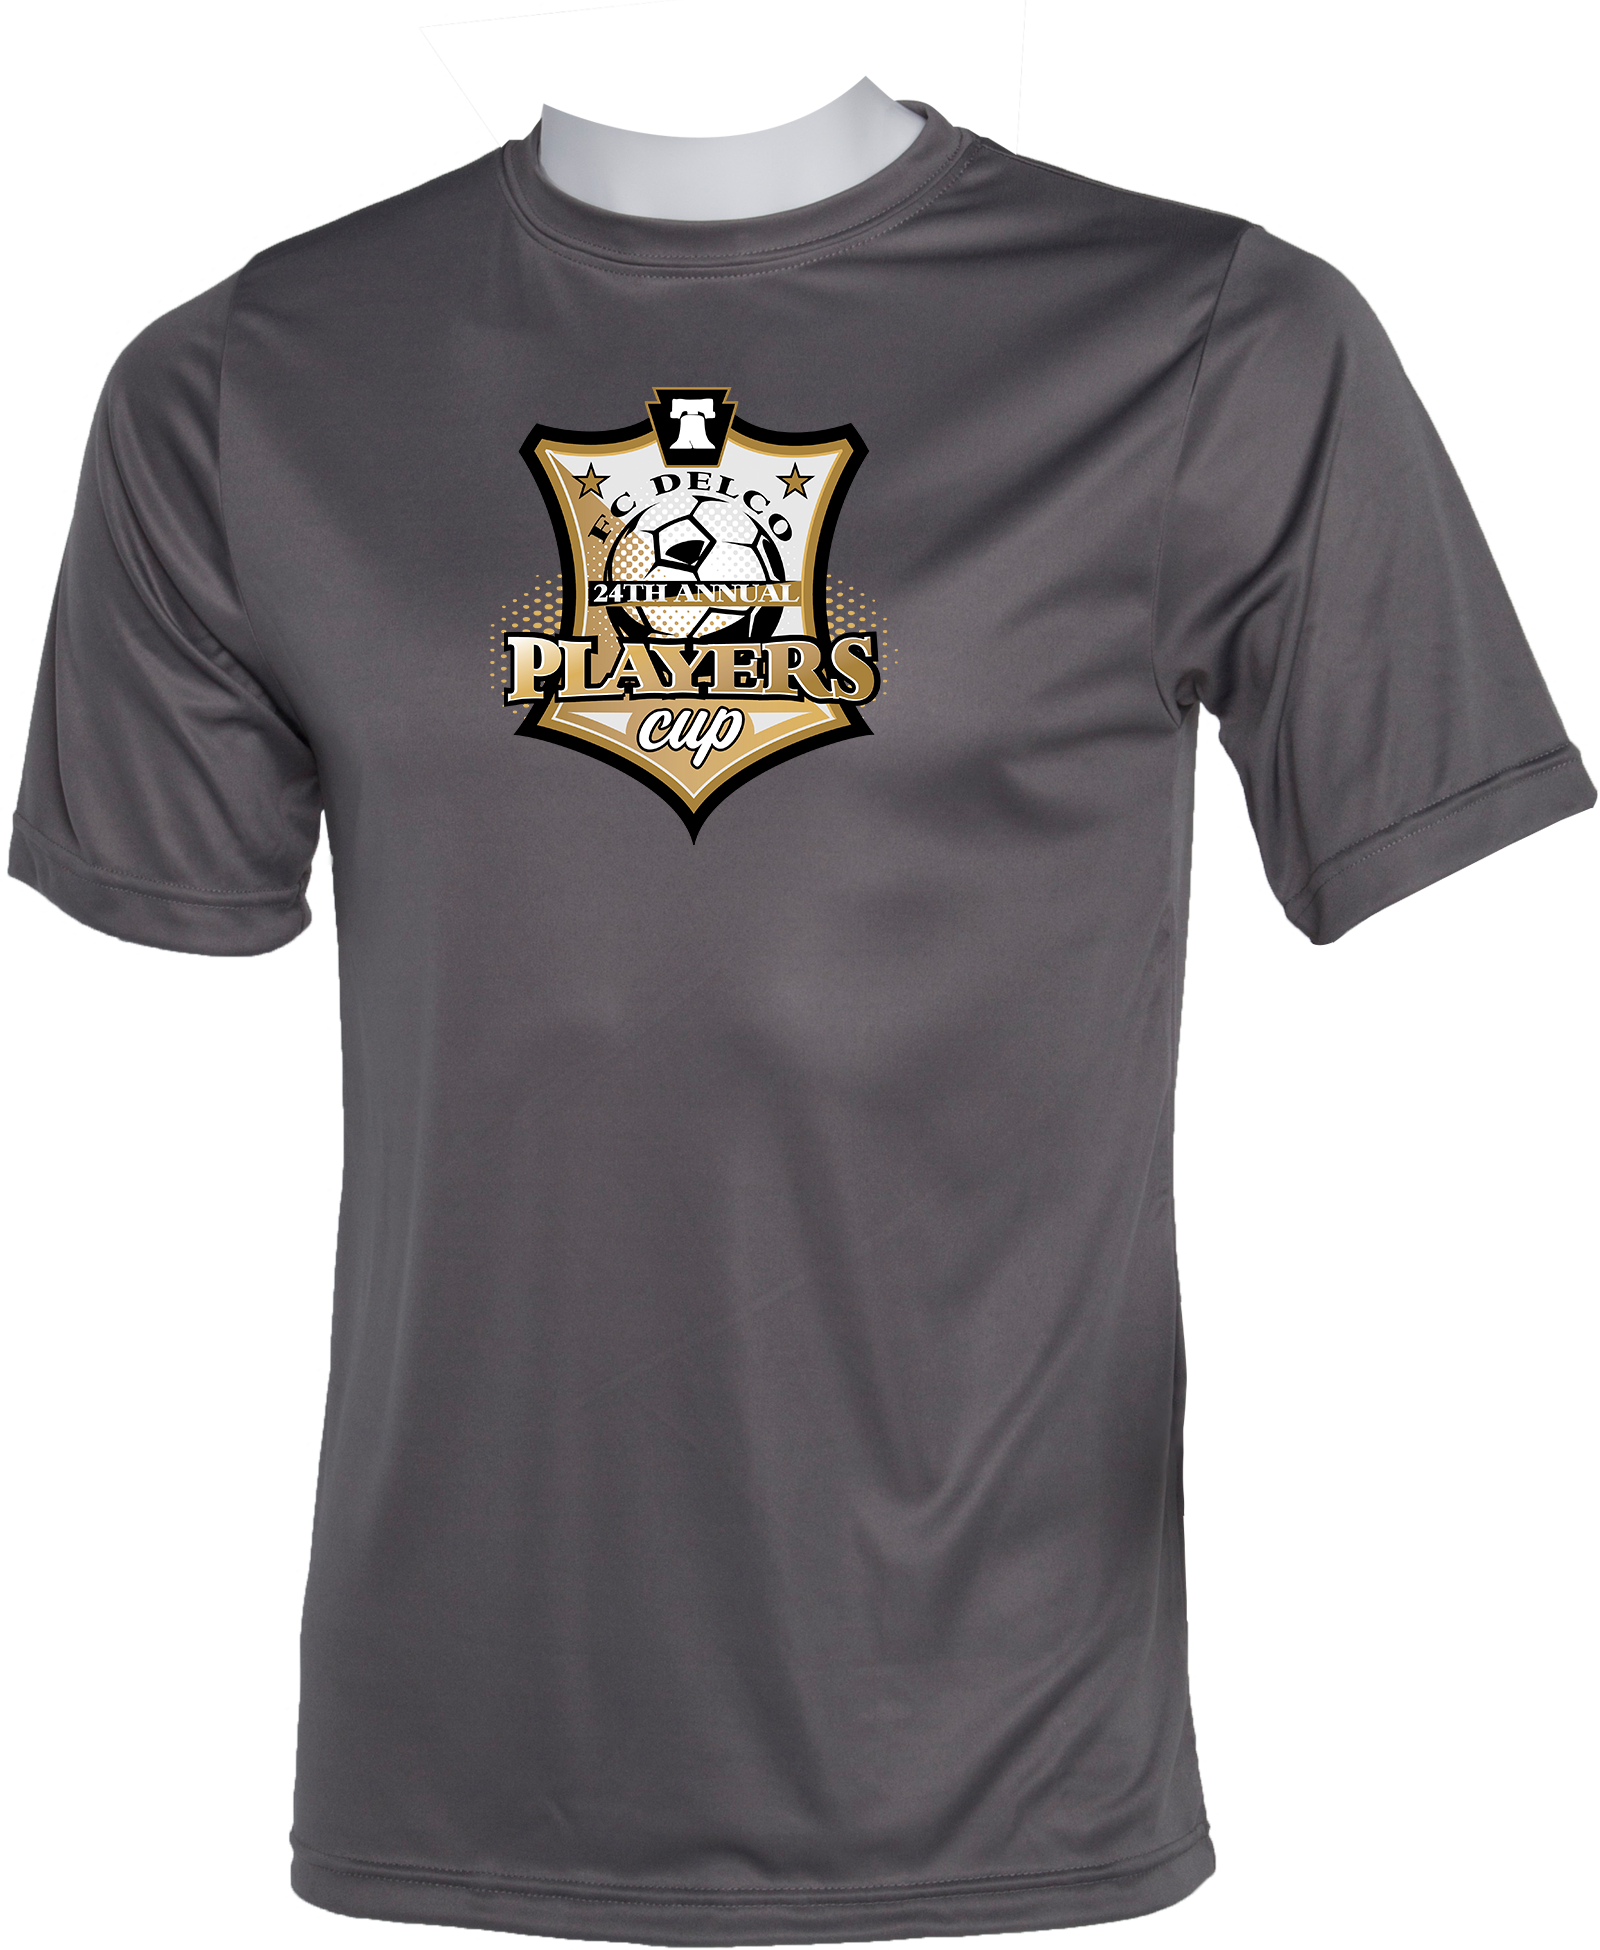 PERFORMANCE SHIRTS - 2023 FC DELCO Players Cup